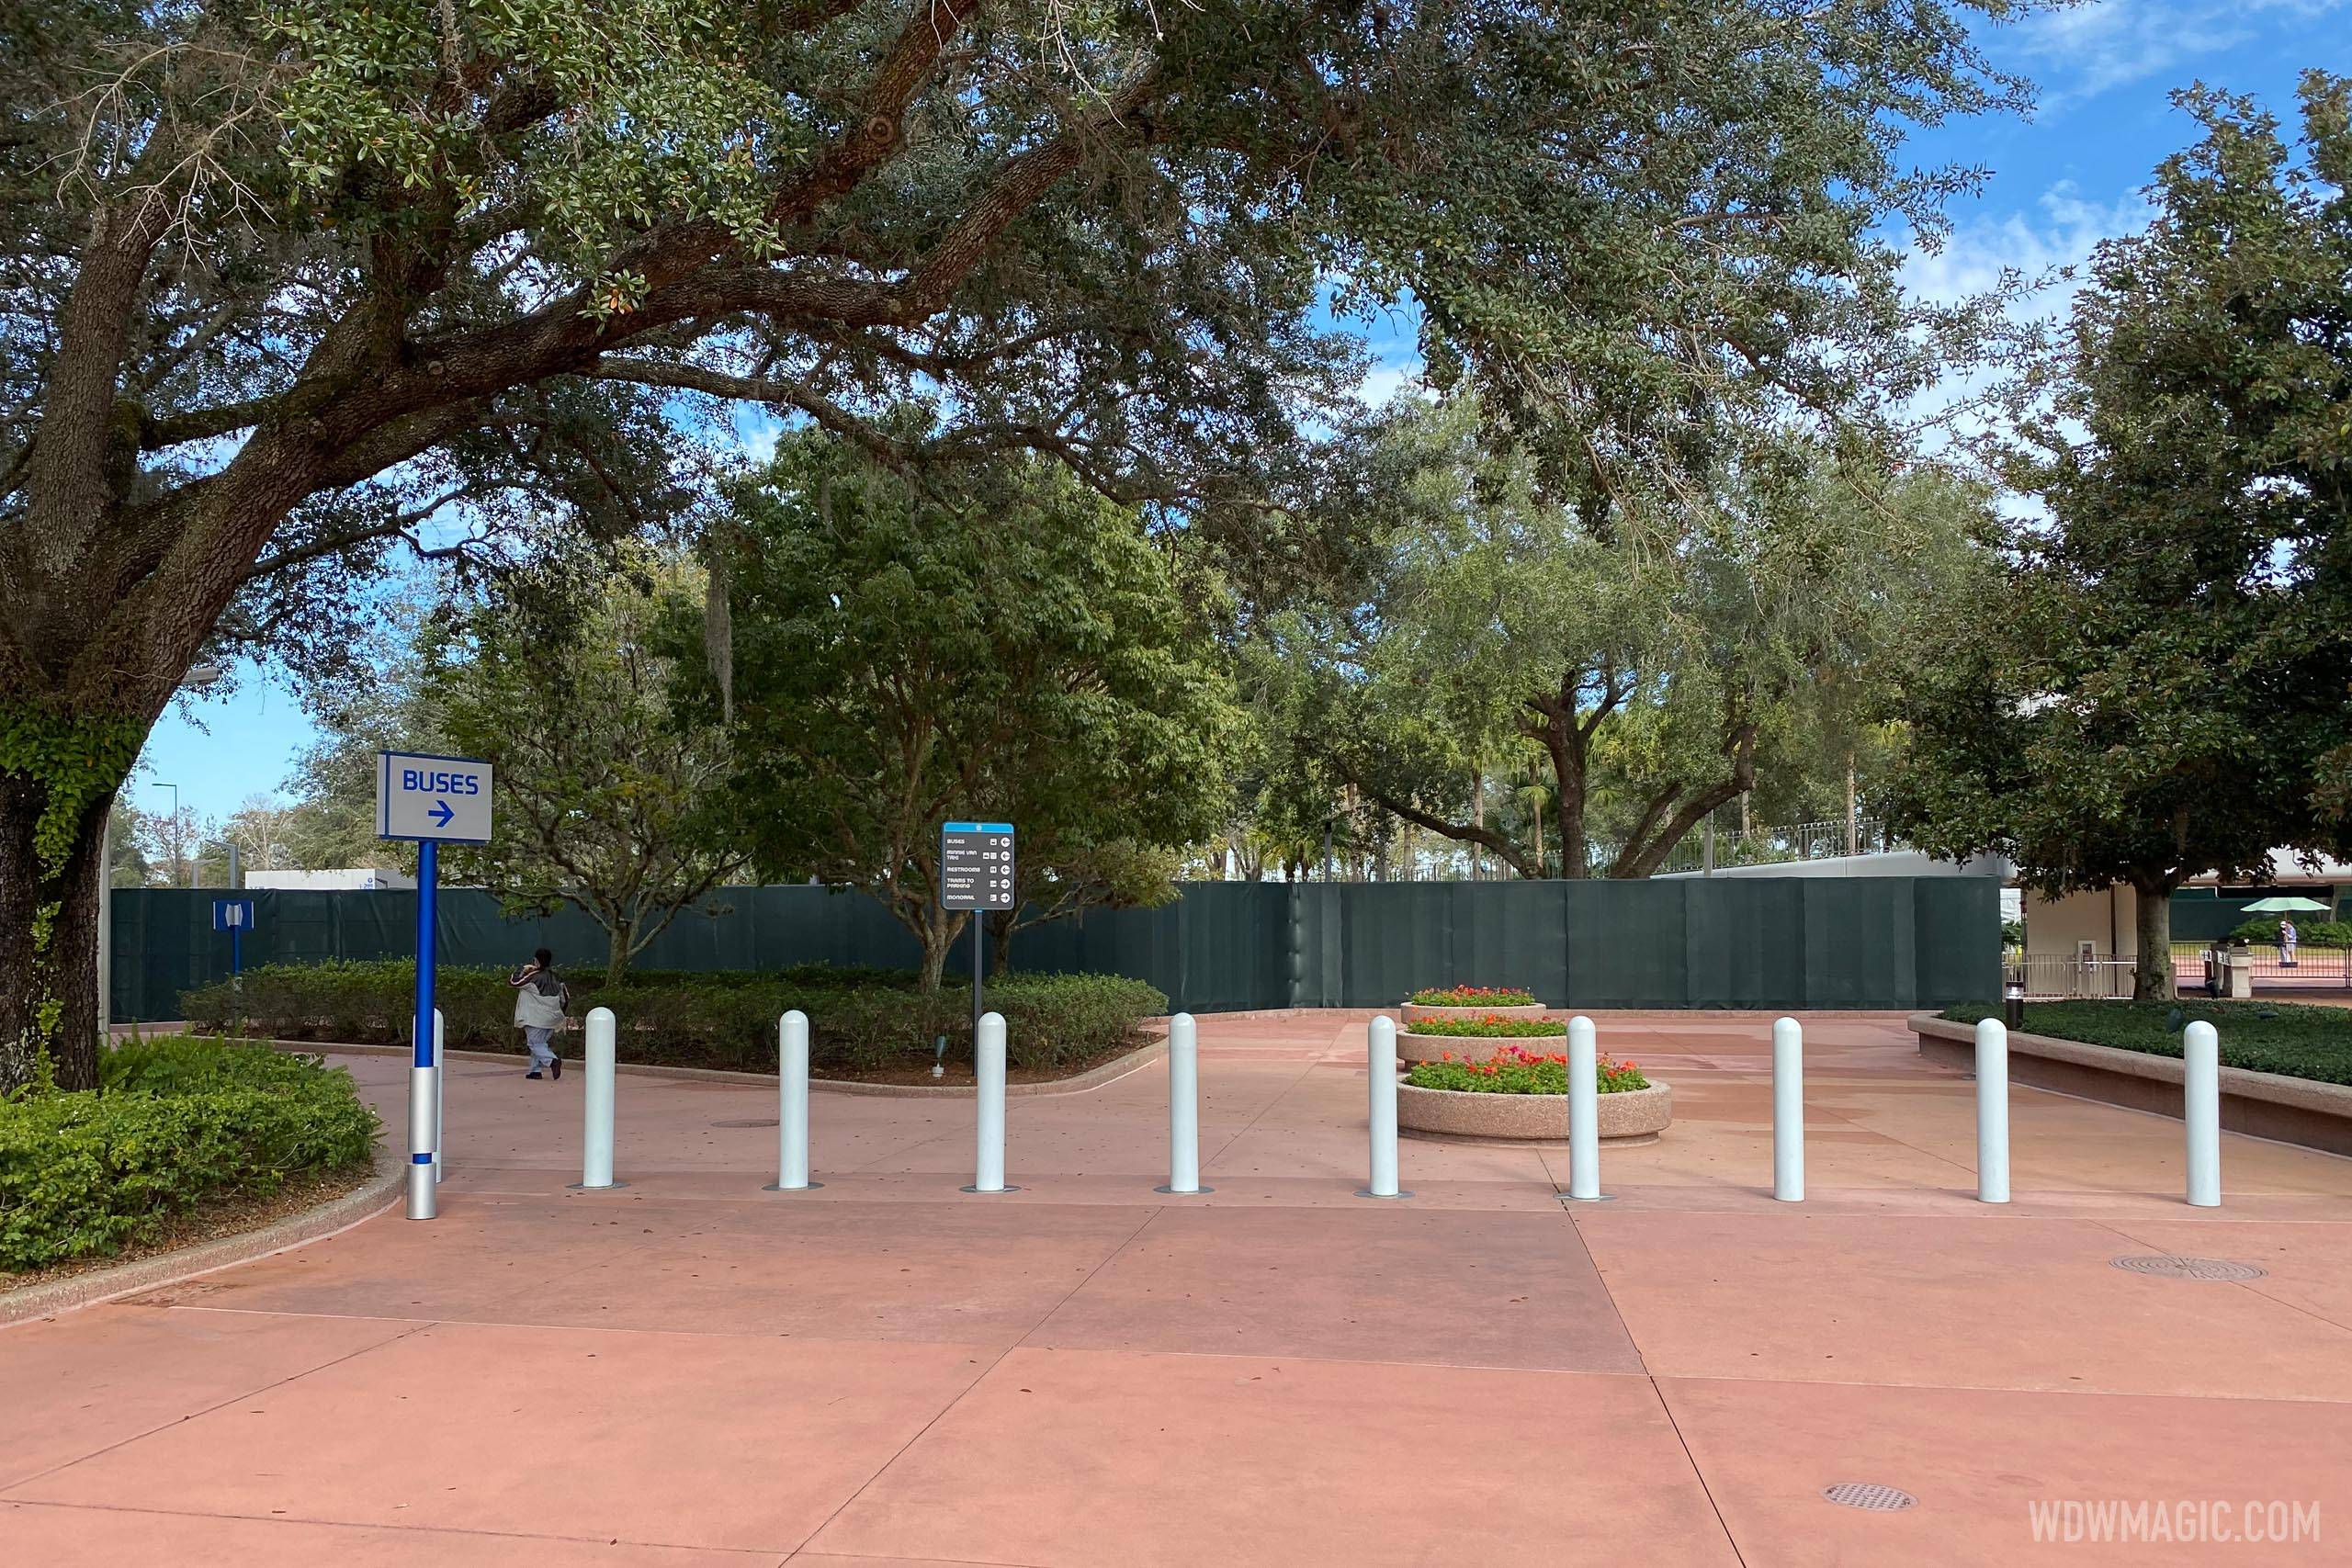 PHOTOS - Construction underway on new Leave a Legacy at EPCOT